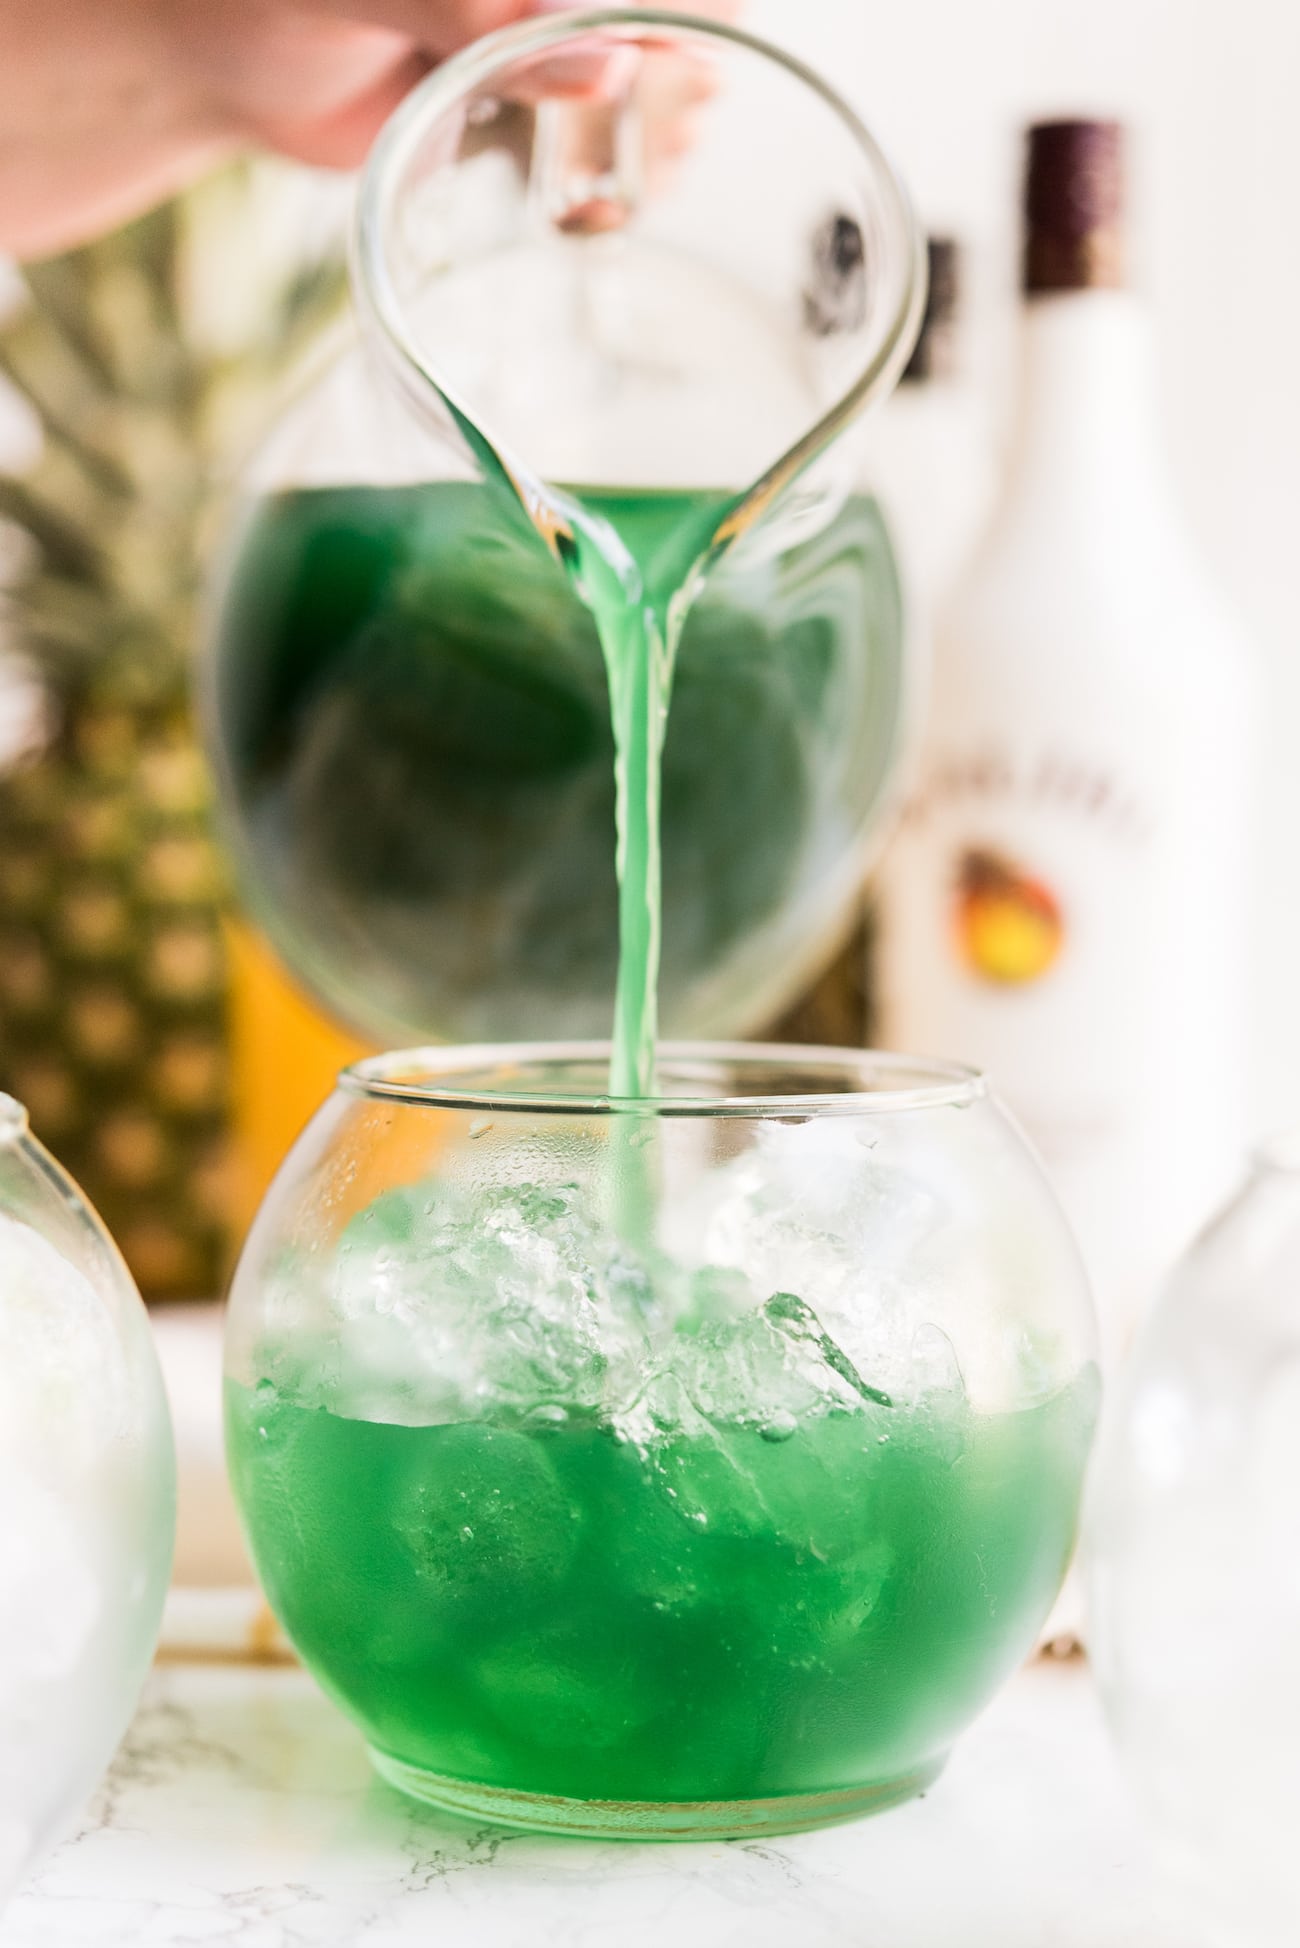 Mermaid Water Fish Bowl Drinks | Summer cocktail recipes, summer party ideas, recipes and more from entertaining blog @cydconverse